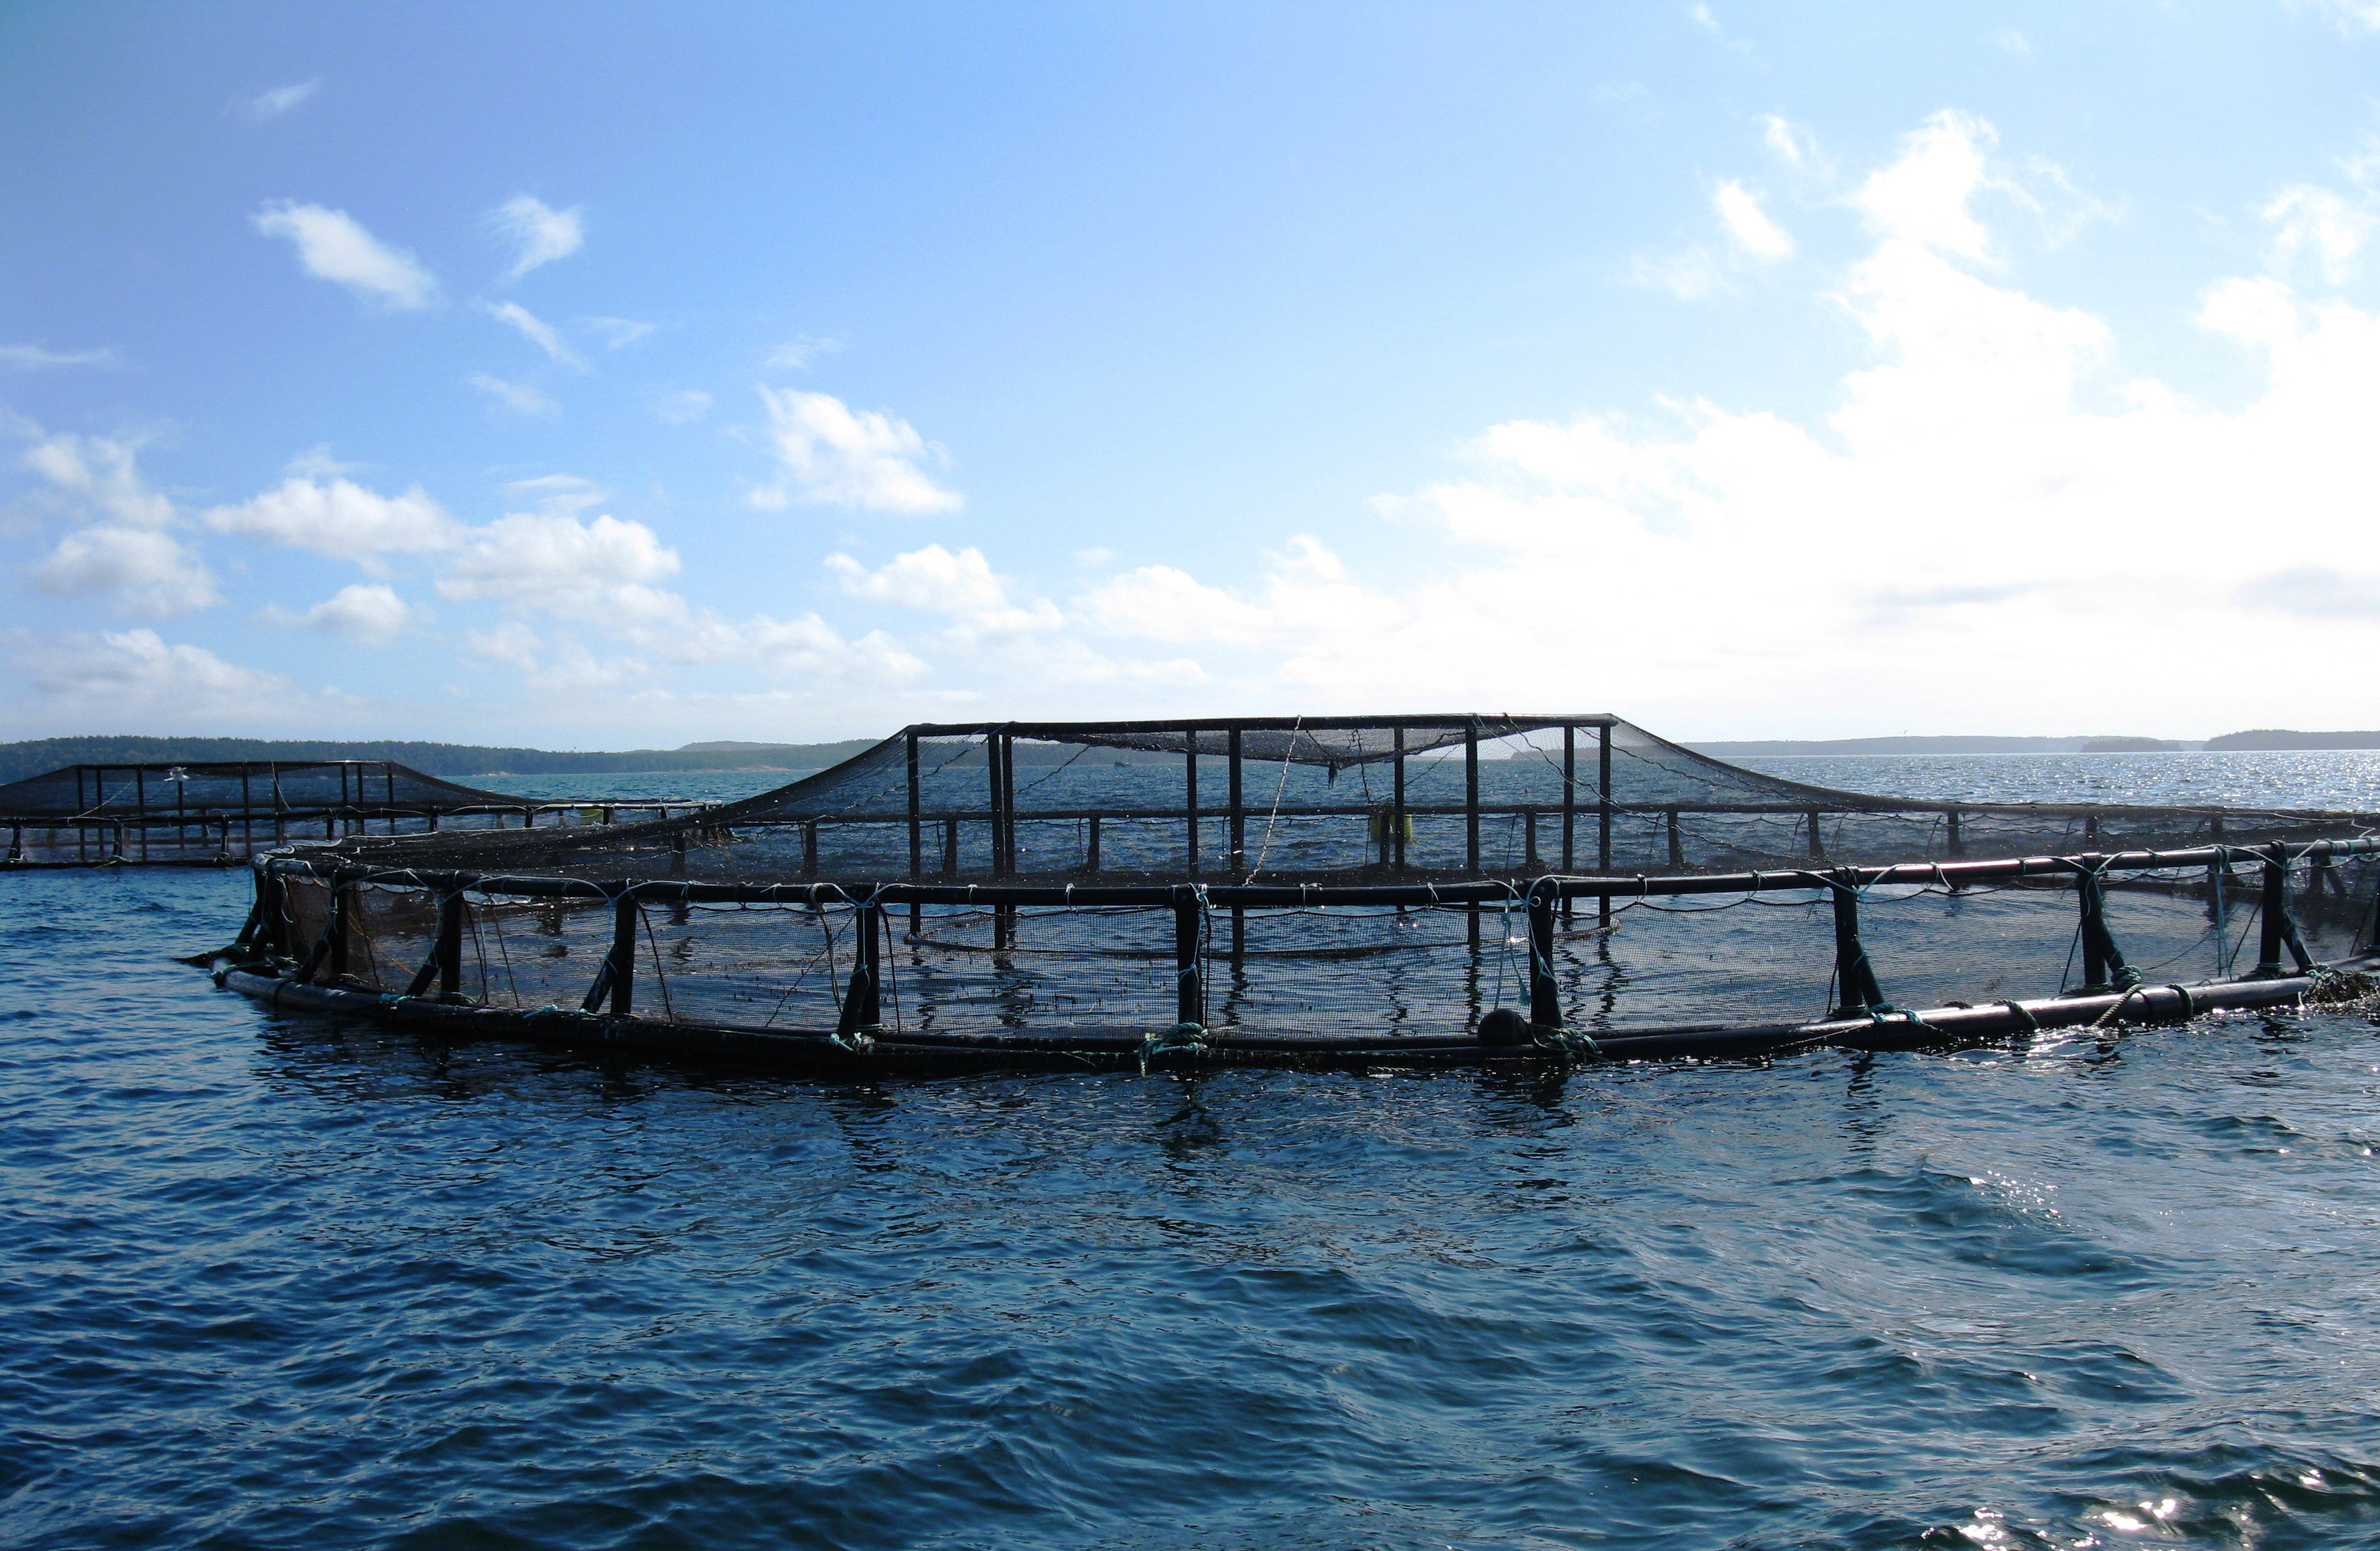 File:An aquaculture pen in the ocean off the coast of Maine.jpg - Wikipedia